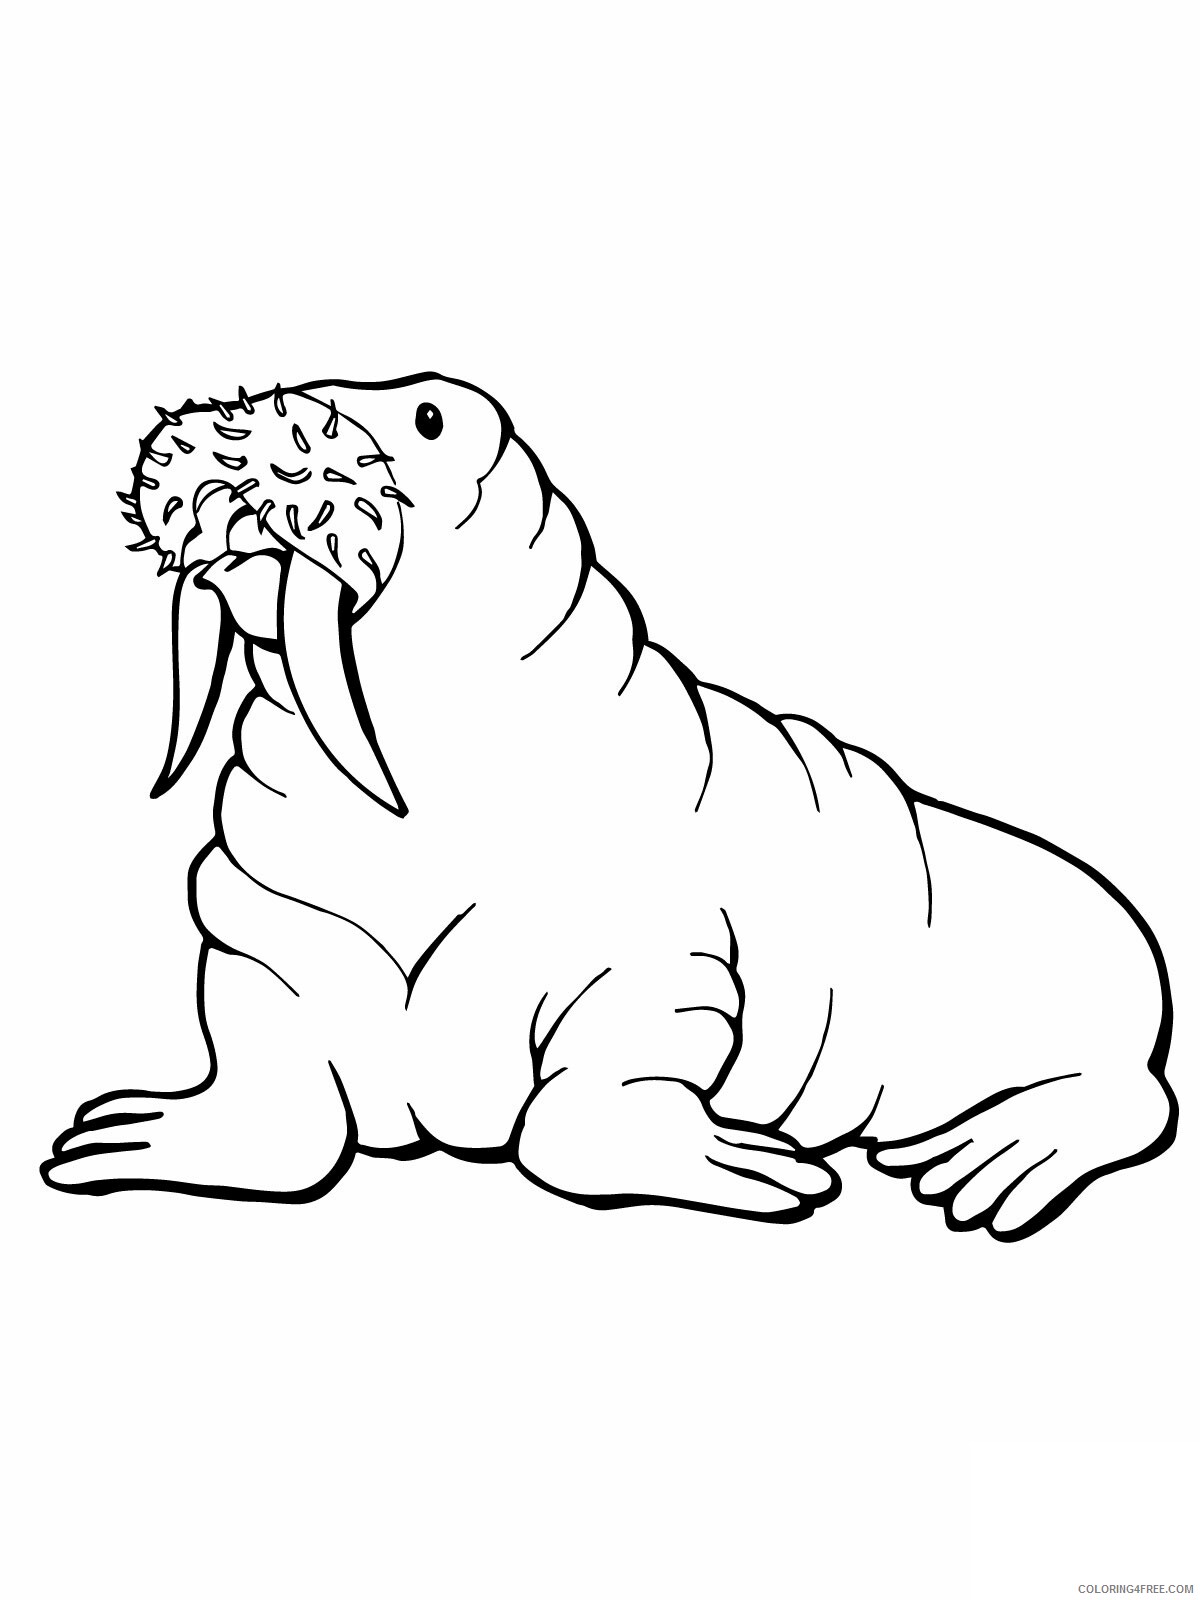 Walrus Coloring Pages Animal Printable Sheets Walrus 2021 4957 Coloring4free